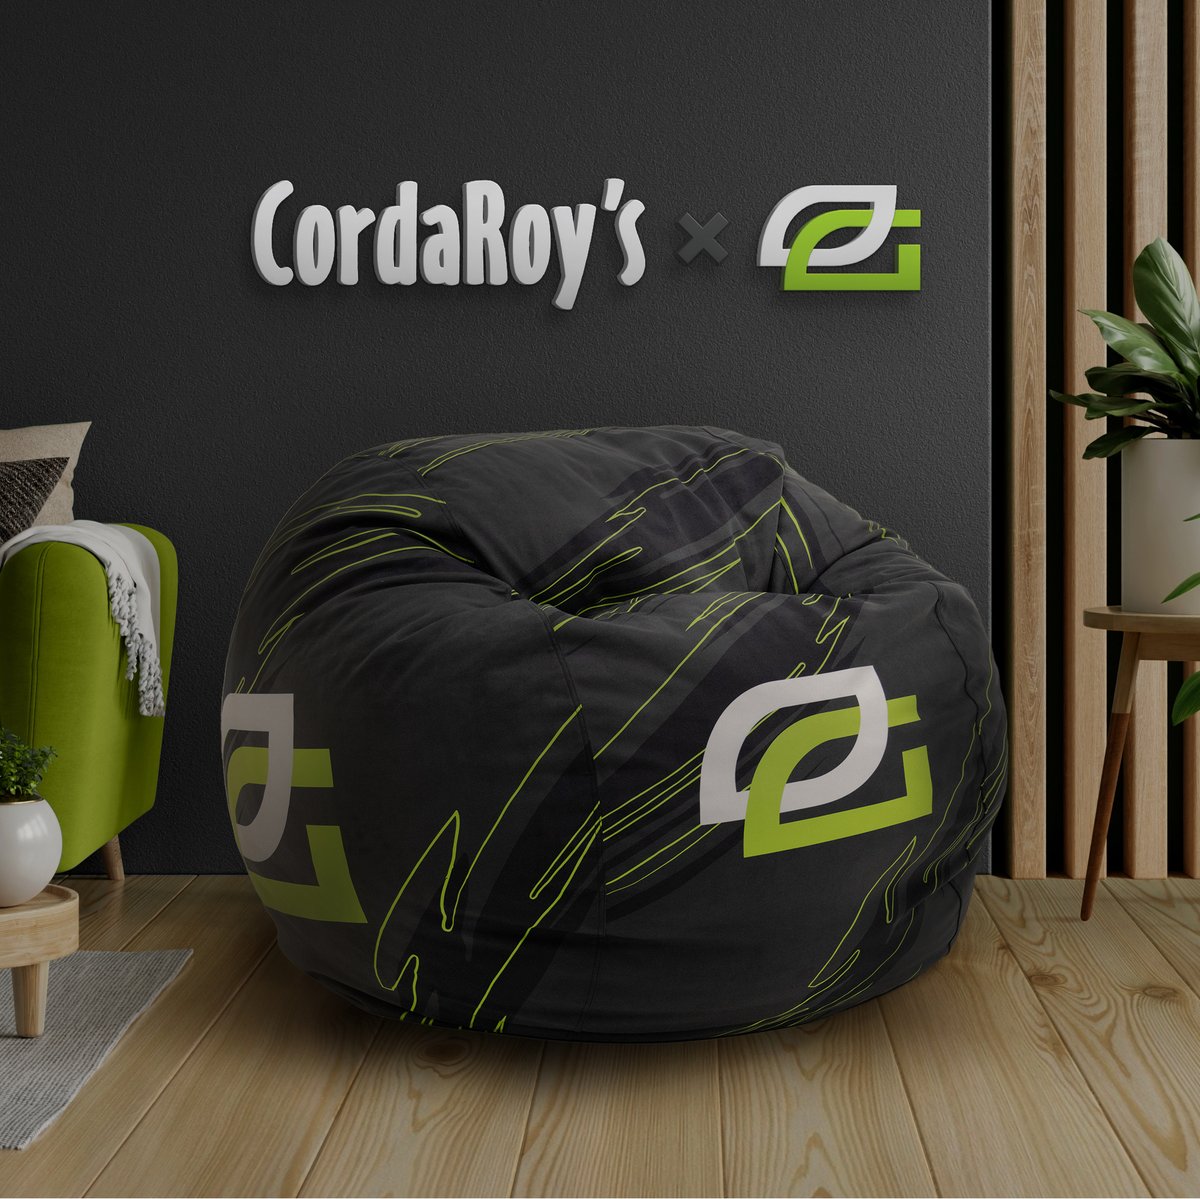 Gamers, get ready to level up your comfort game! The OpTic Gaming Bean Bag by CordaRoy's 🎮 is available to Order Now!

✔️There's a Bed Inside
✔️Foam-filled & never goes flat
✔️Lifetime Guarantee

#OpTicGaming #CordaRoys #OpTicGamingBeanBag
cordaroys.com/products/optic…